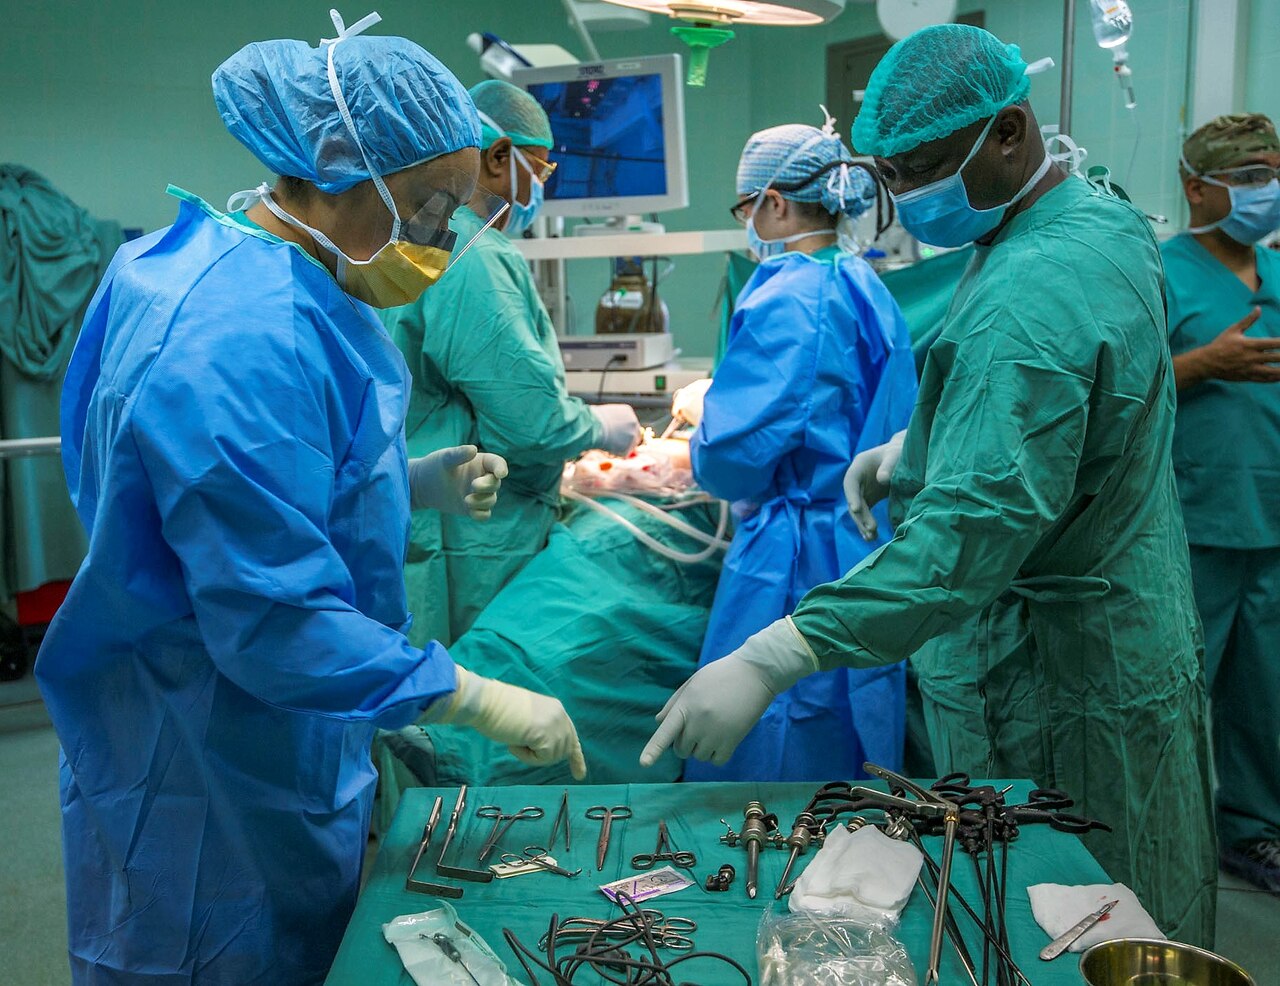 Army Staff Sgt. Jennifer Singh, an operating room technician, works with a Gabonese military medical professional to perform a gall bladder surgery during Medical Readiness Training Exercise 17-4 at Hospital D’Instruction Des Armees in Libreville, Gabon, June 19, 2017. Army photo by Staff Sgt. Shejal Pulivarti